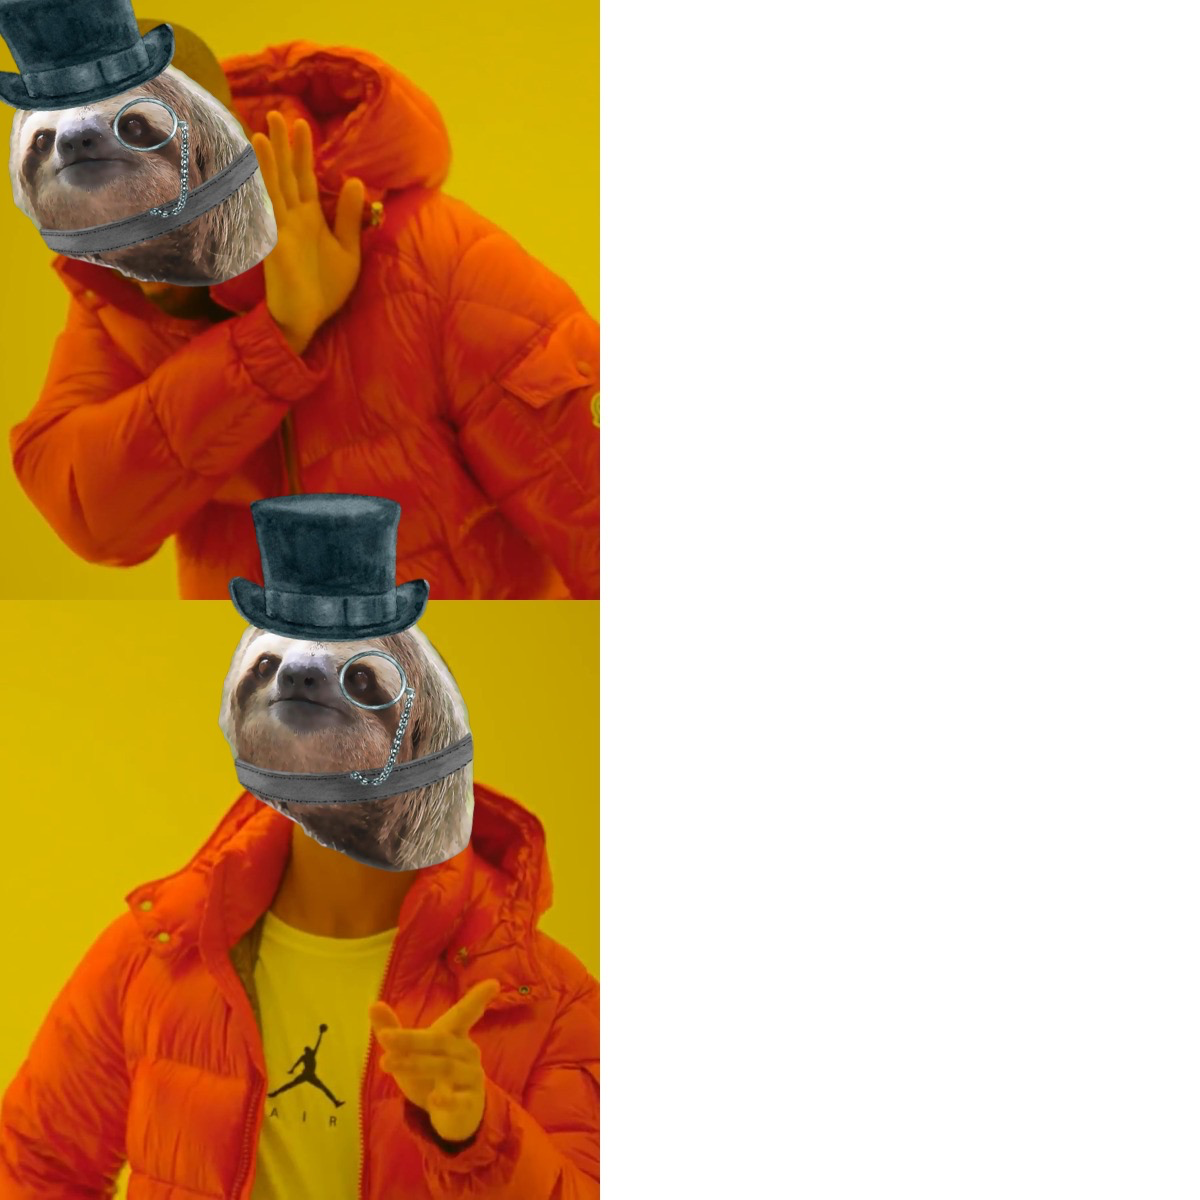 High Quality Monocle tophat sloth hotline bling Blank Meme Template